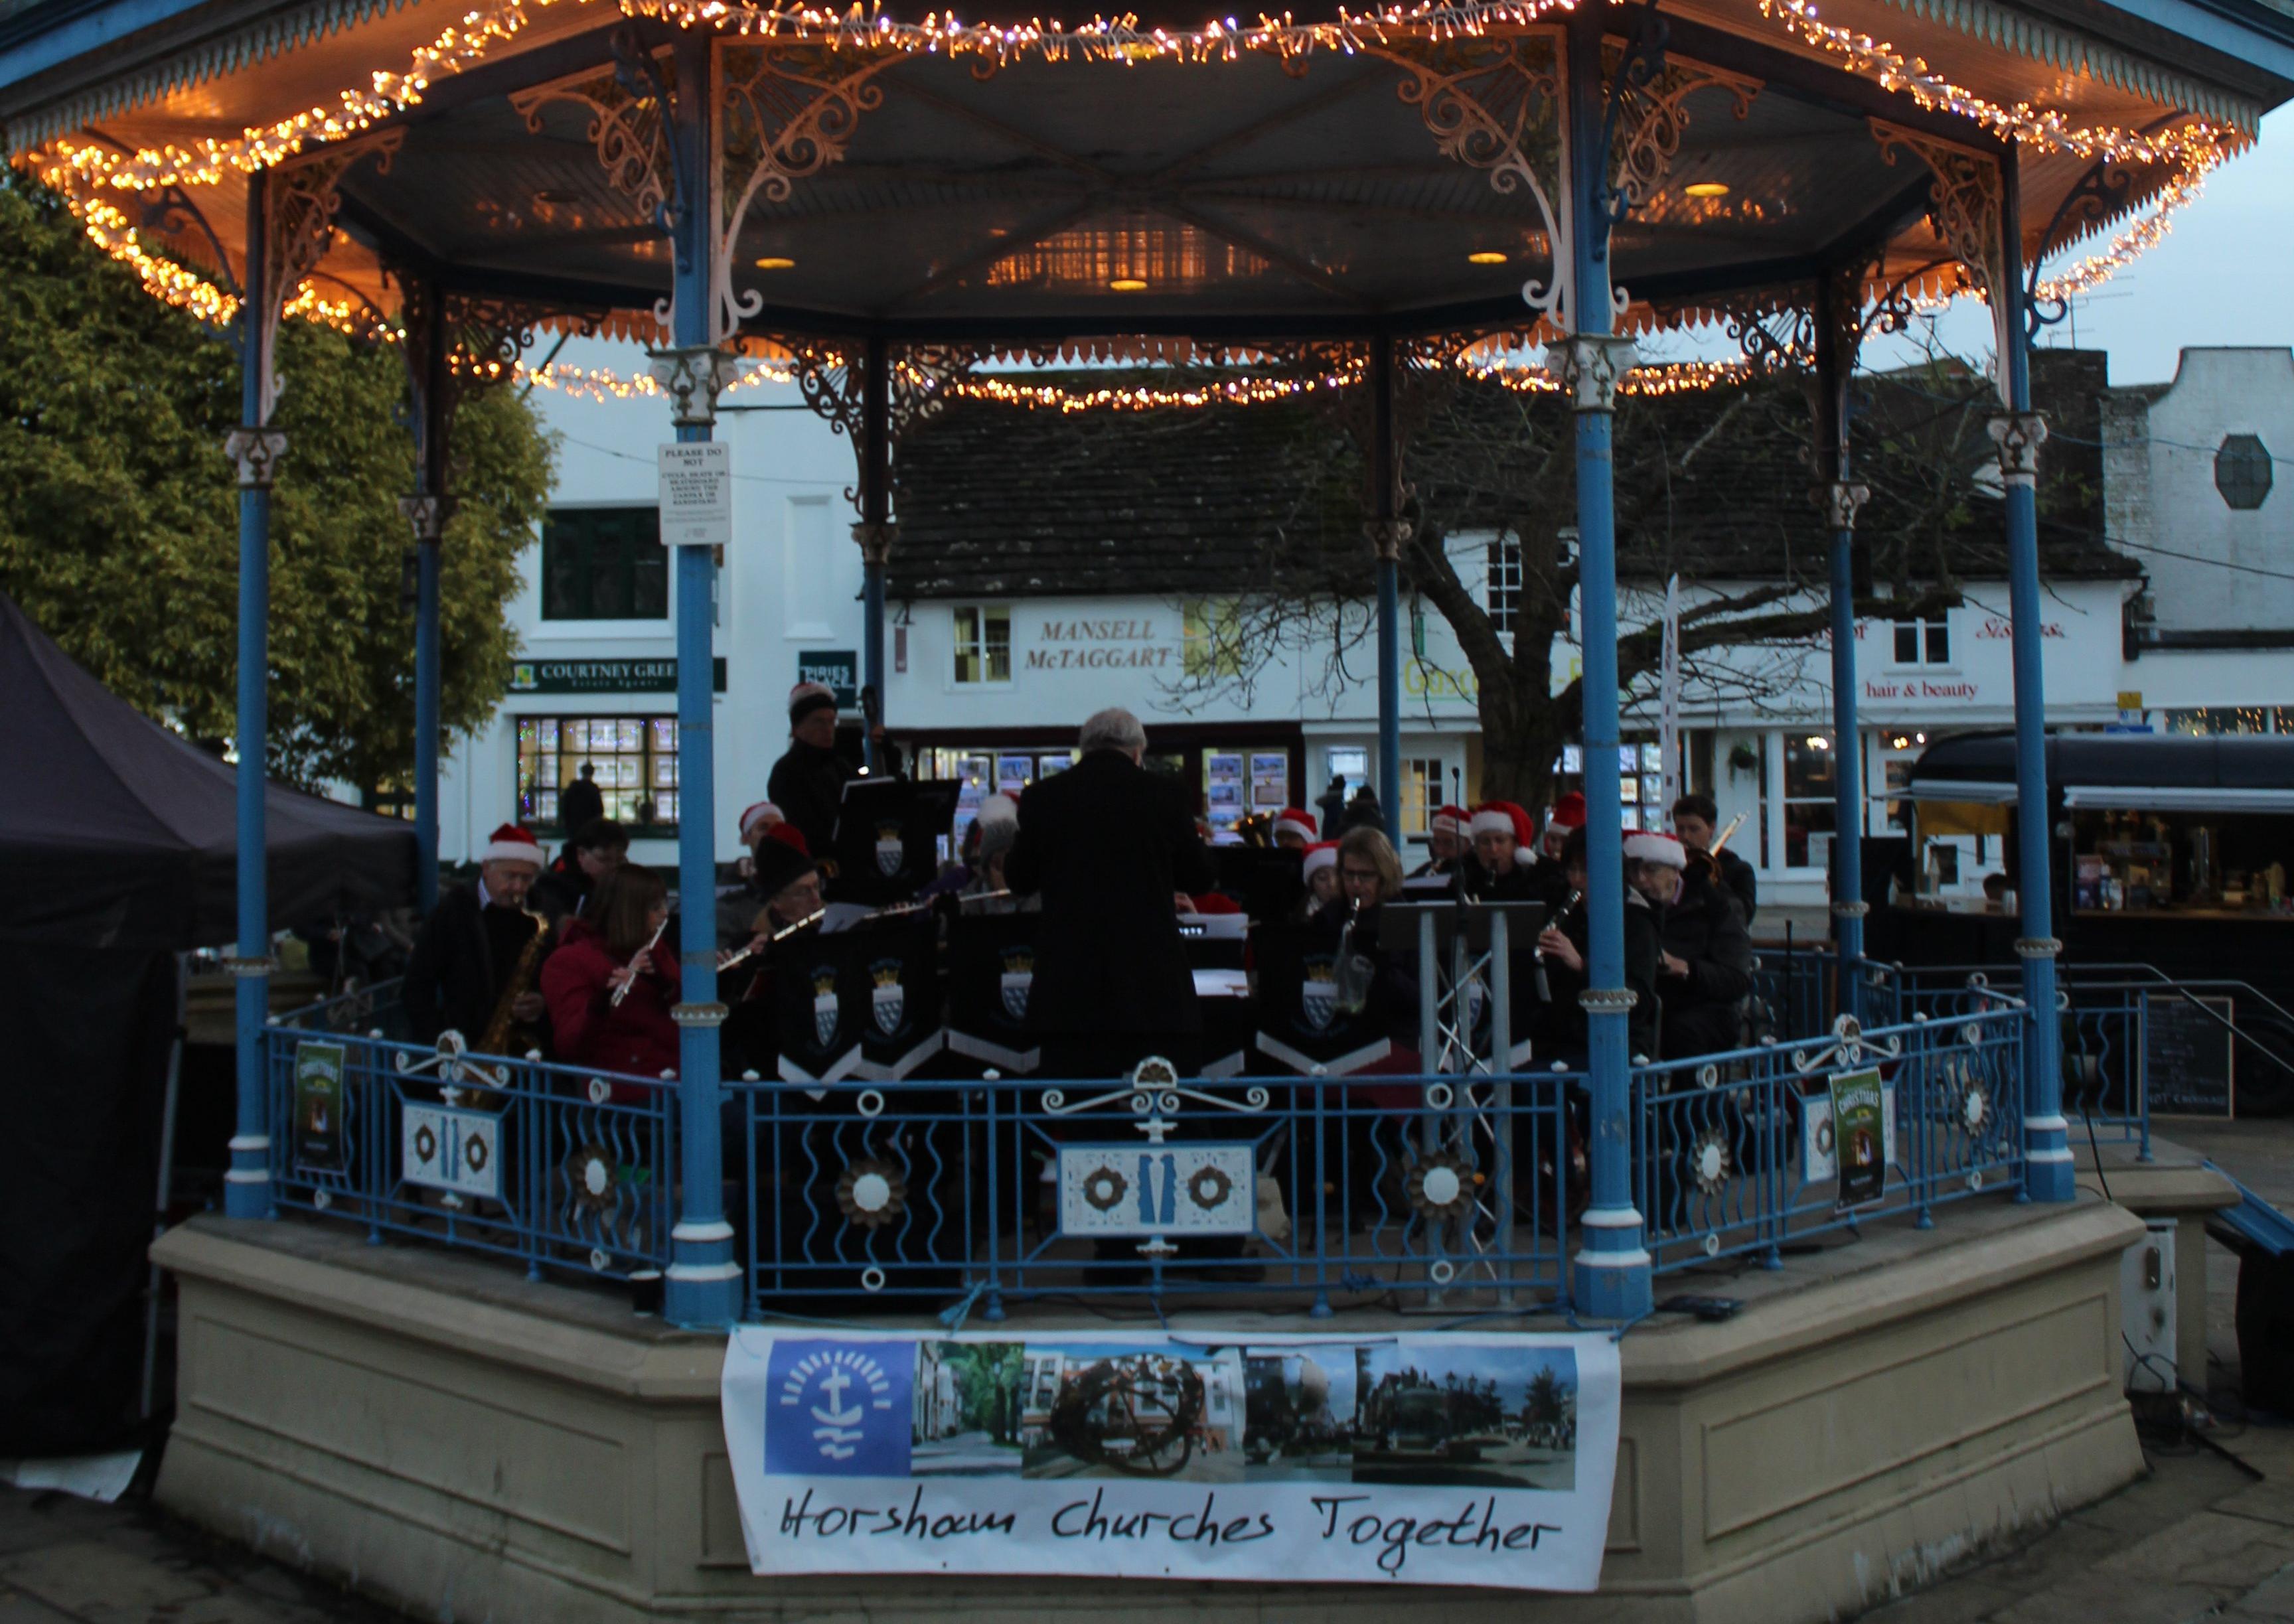 Festive music boosted the Christmas spirit. Photo by Lydia Petch